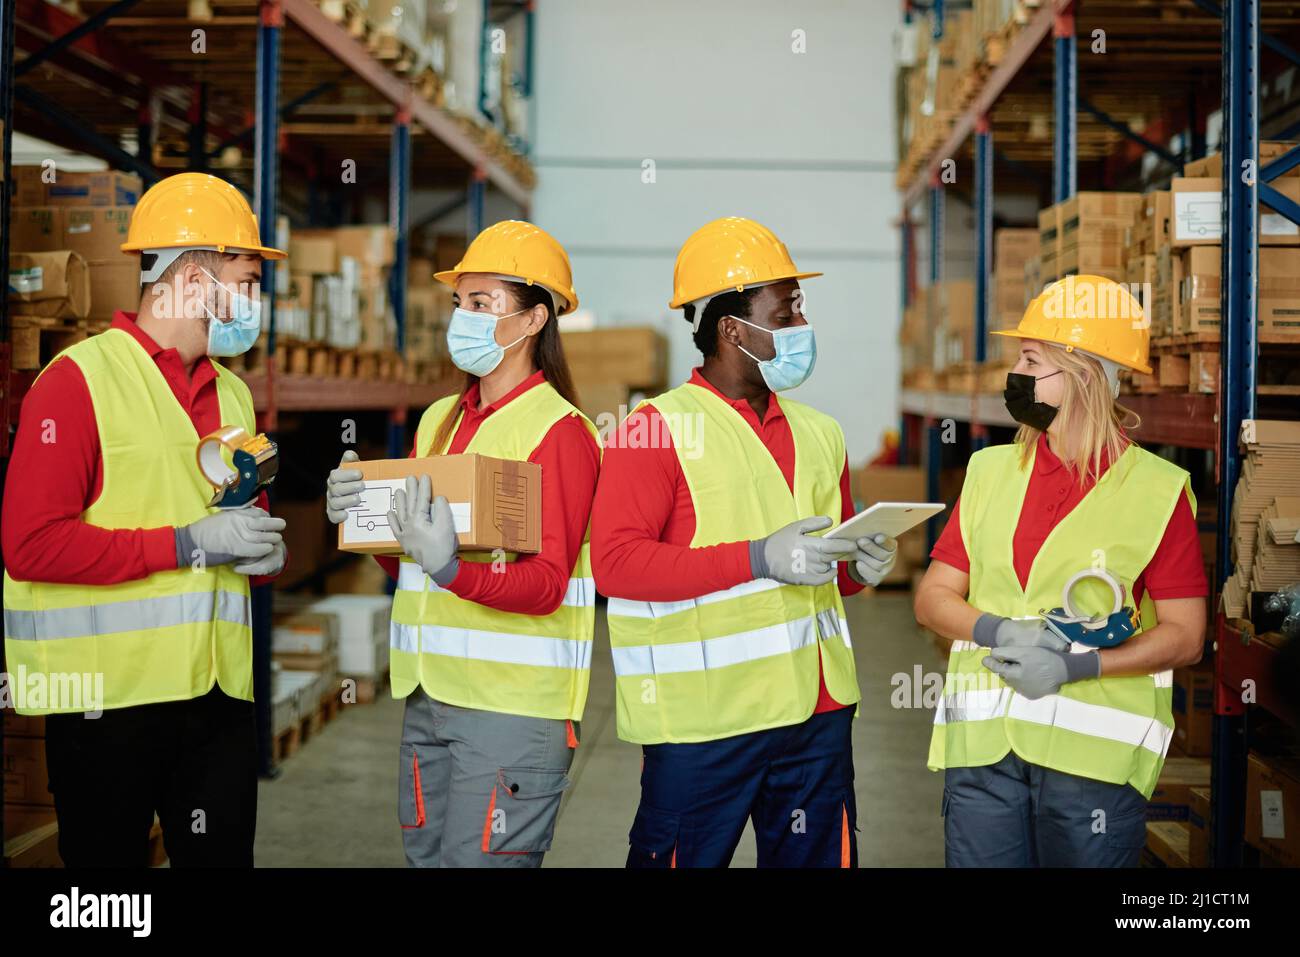 Multiracial group of warehouse workers hold delivery box, order ipad while wearing safety mask for coronavirus prevention - Focus on faces Stock Photo